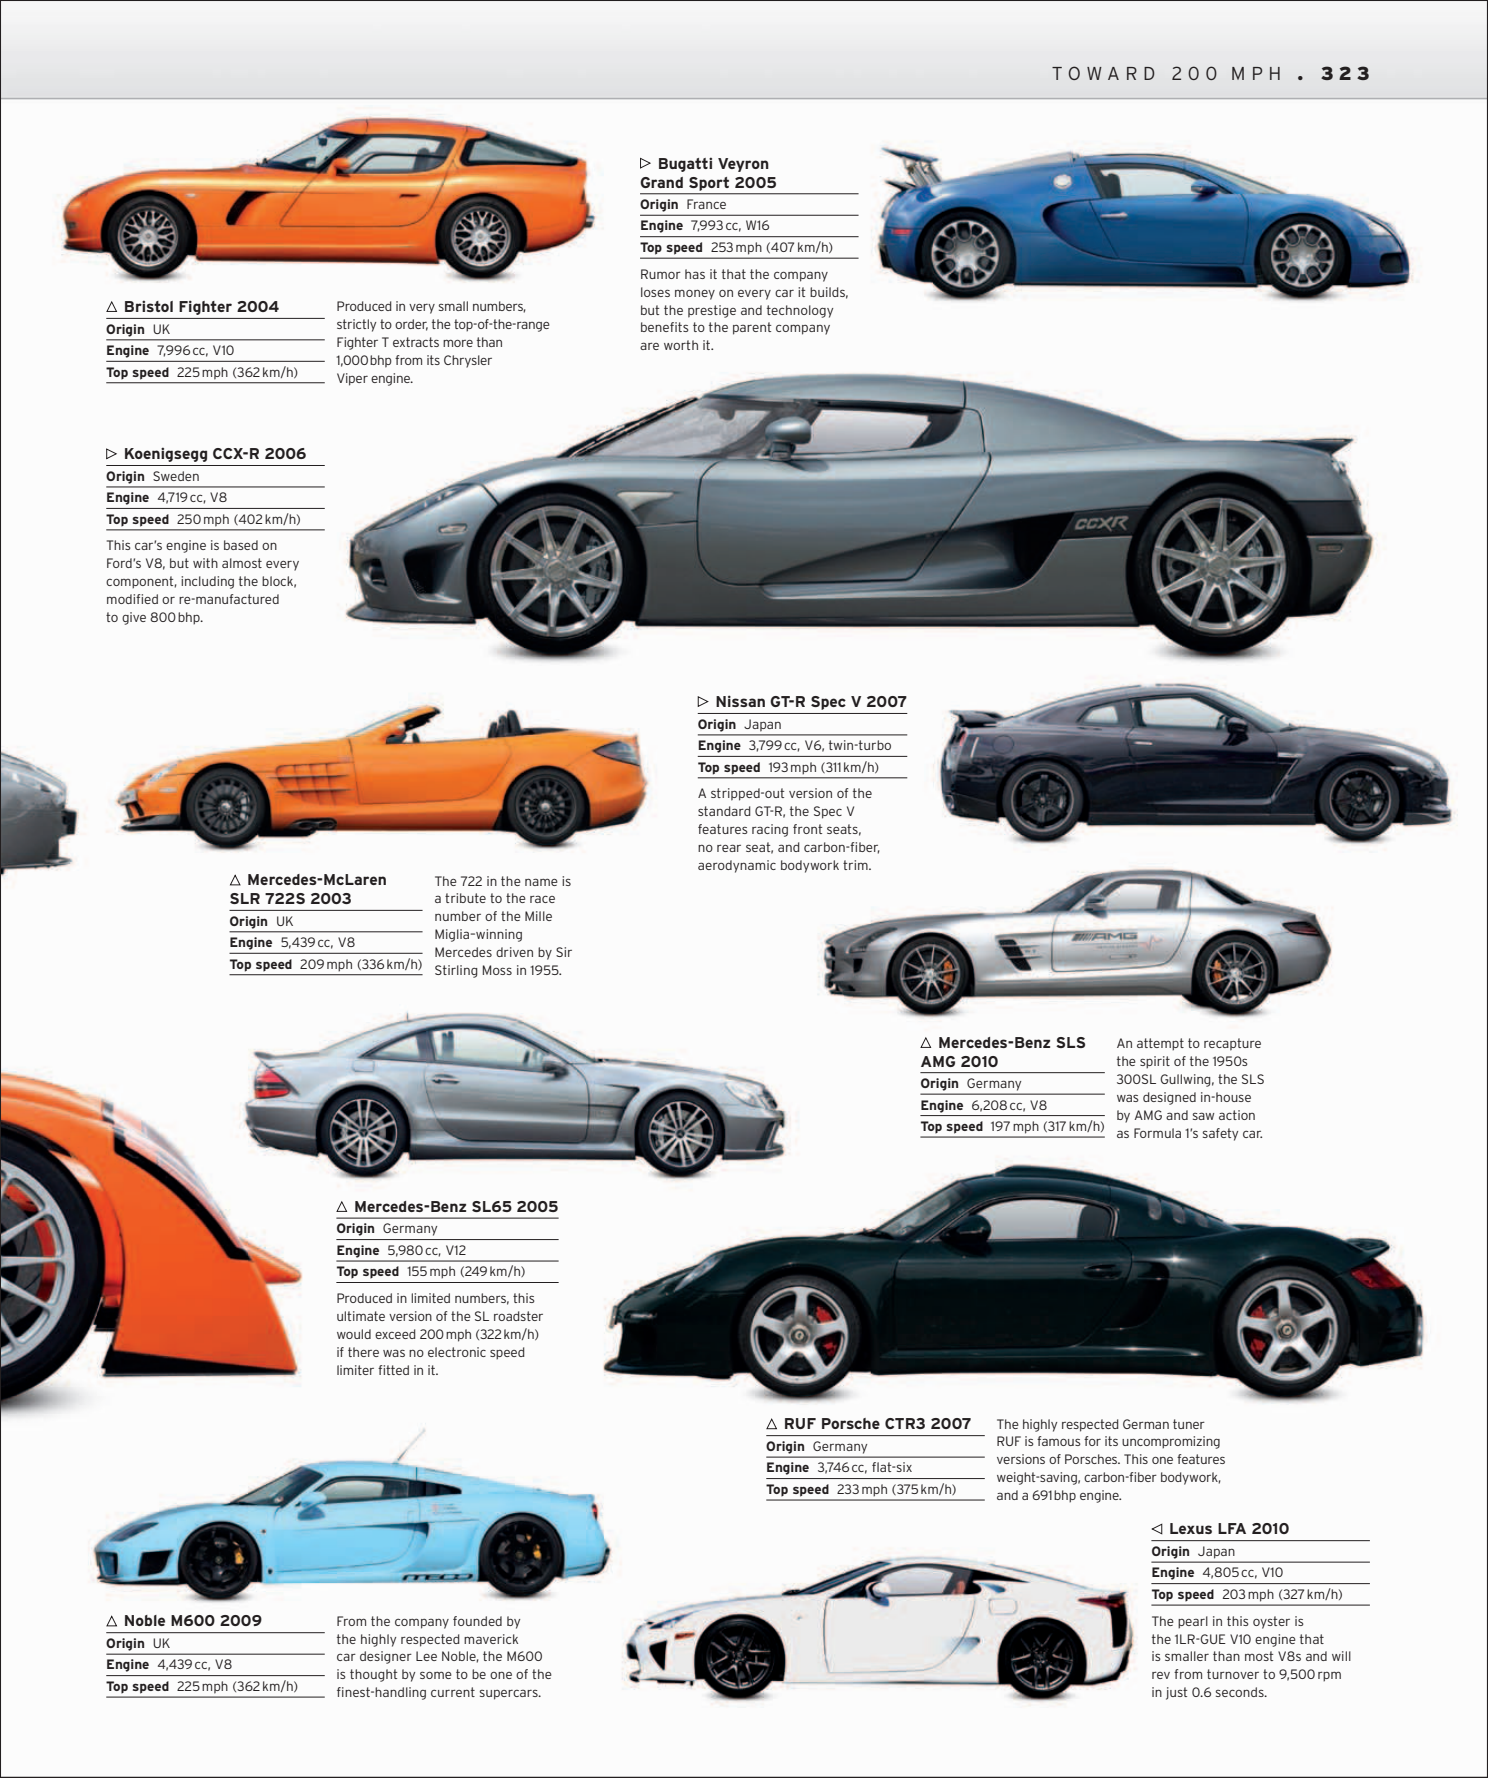 Car%20-%20The%20Definitive%20Visual%20History%20of%20the%20Automobile_325.png